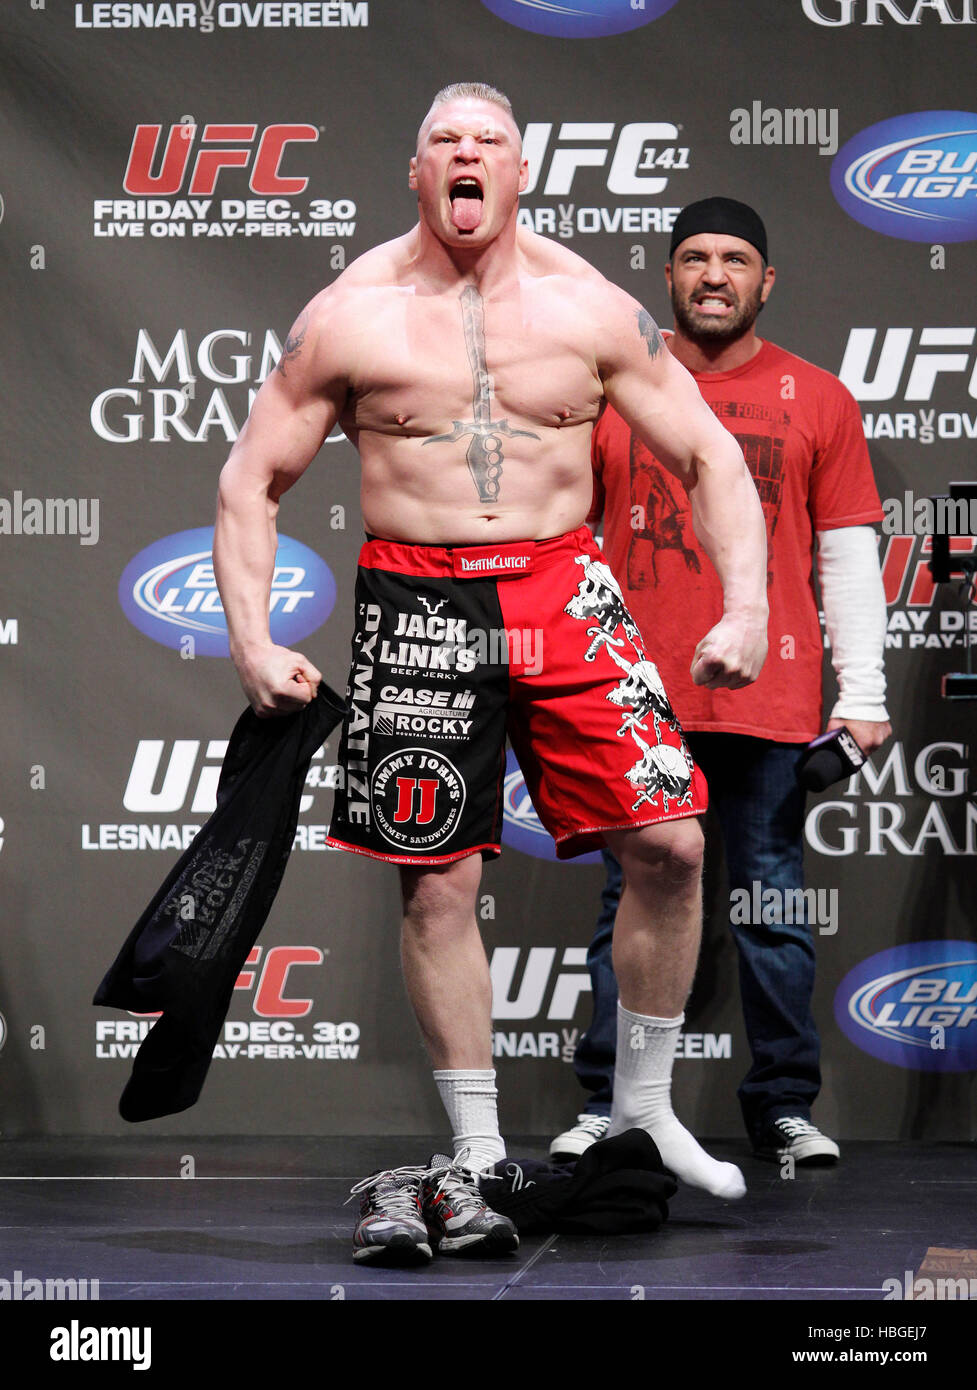 UFC fighter Brock Lesnar arrives at the weigh-ins for UFC 141 at the Stock  Photo - Alamy